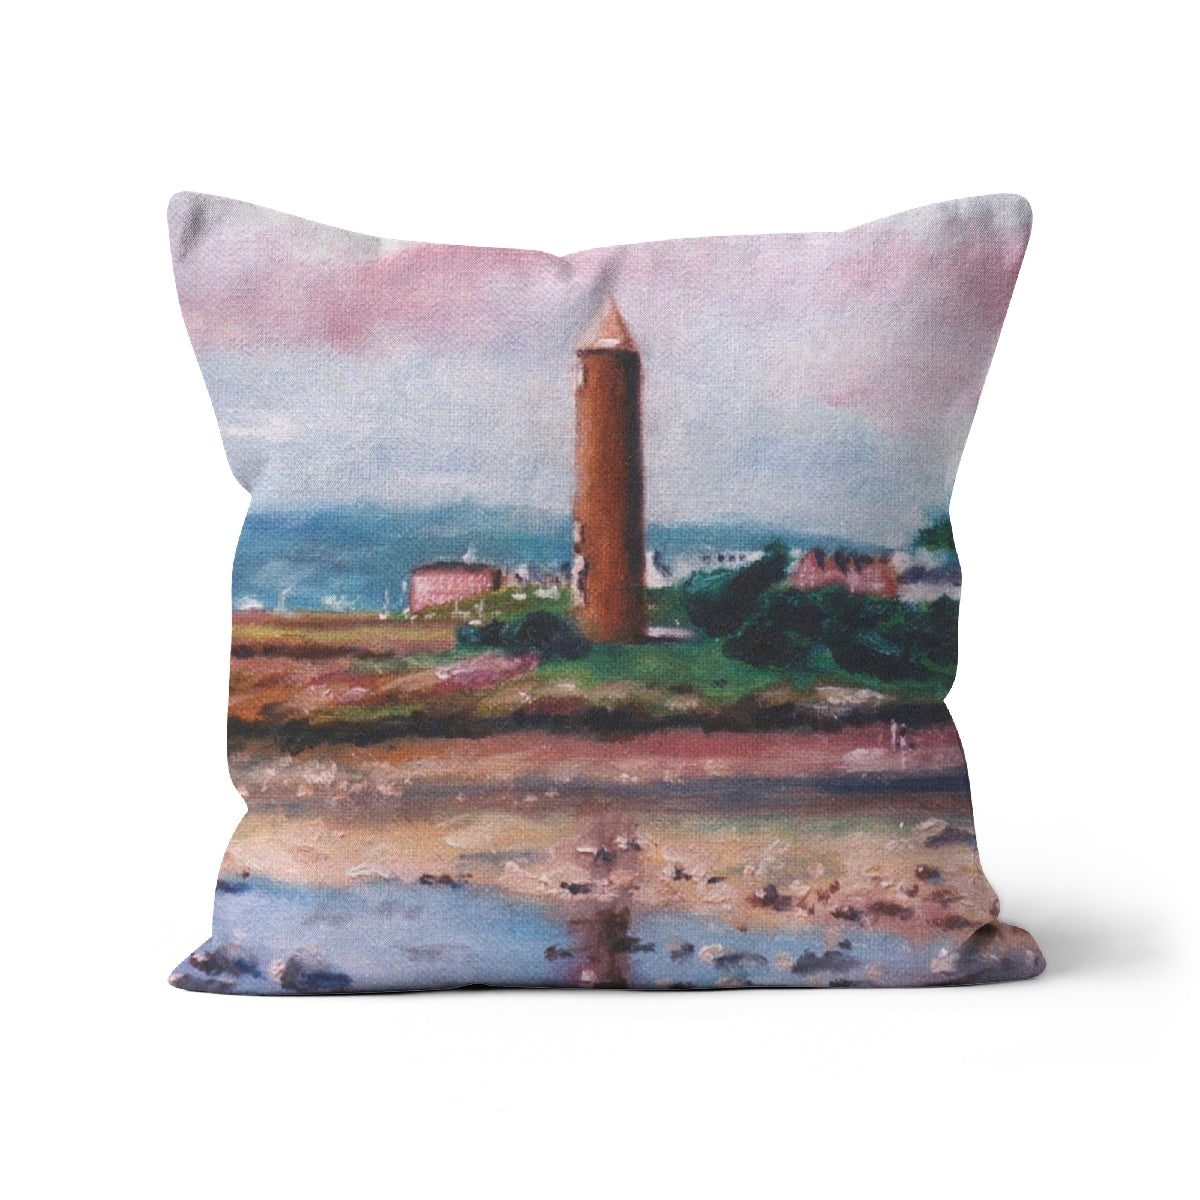 Pencil Point Largs Art Gifts Cushion-Cushions-River Clyde Art Gallery-Canvas-12"x12"-Paintings, Prints, Homeware, Art Gifts From Scotland By Scottish Artist Kevin Hunter